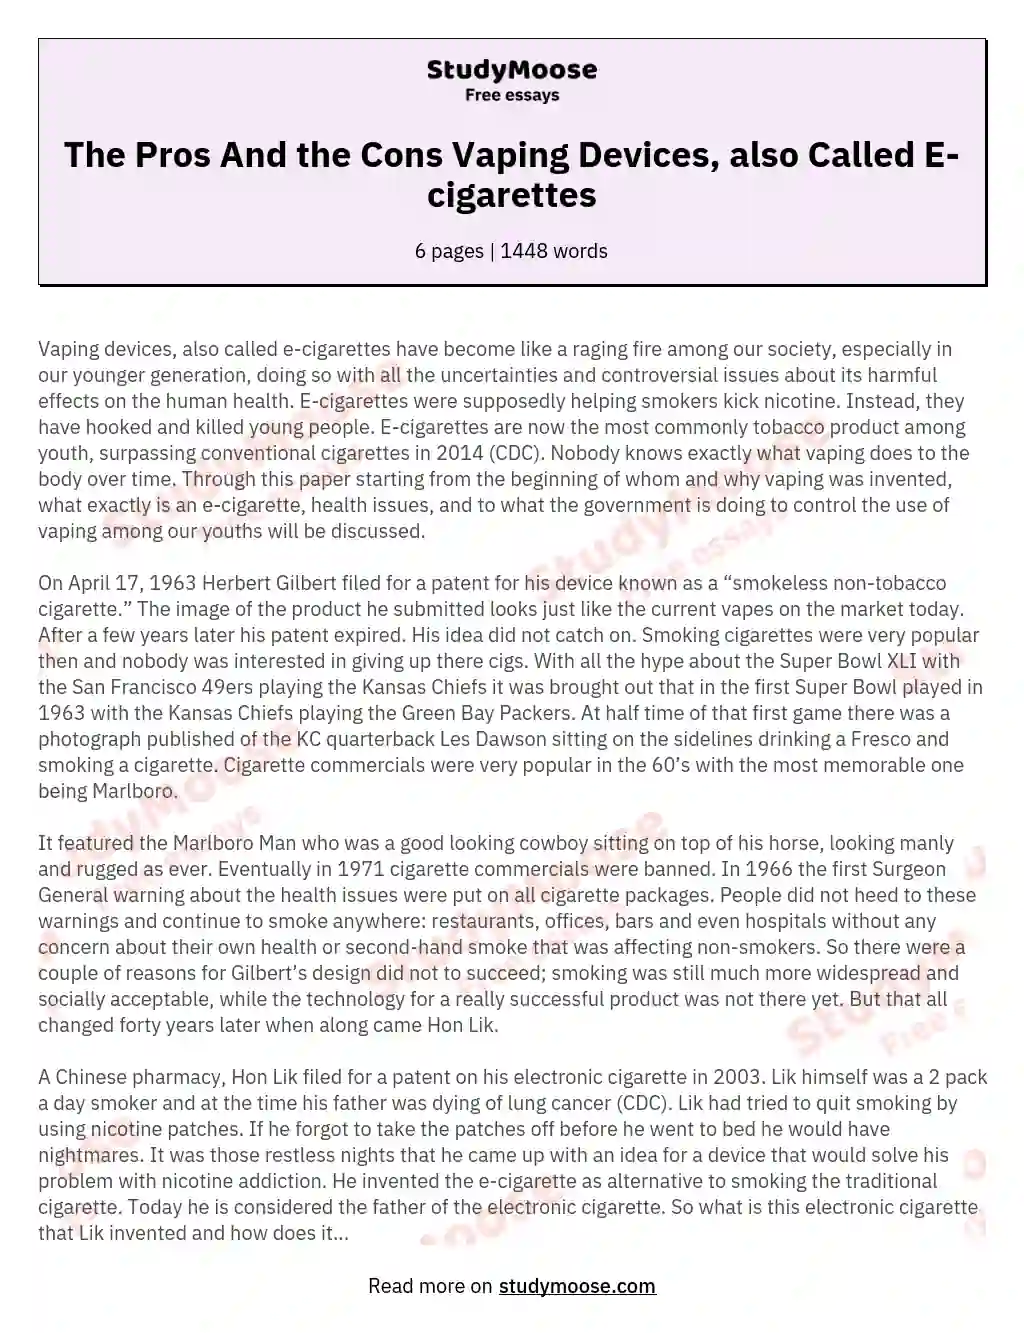 The Pros And the Cons Vaping Devices, also Called E-cigarettes essay